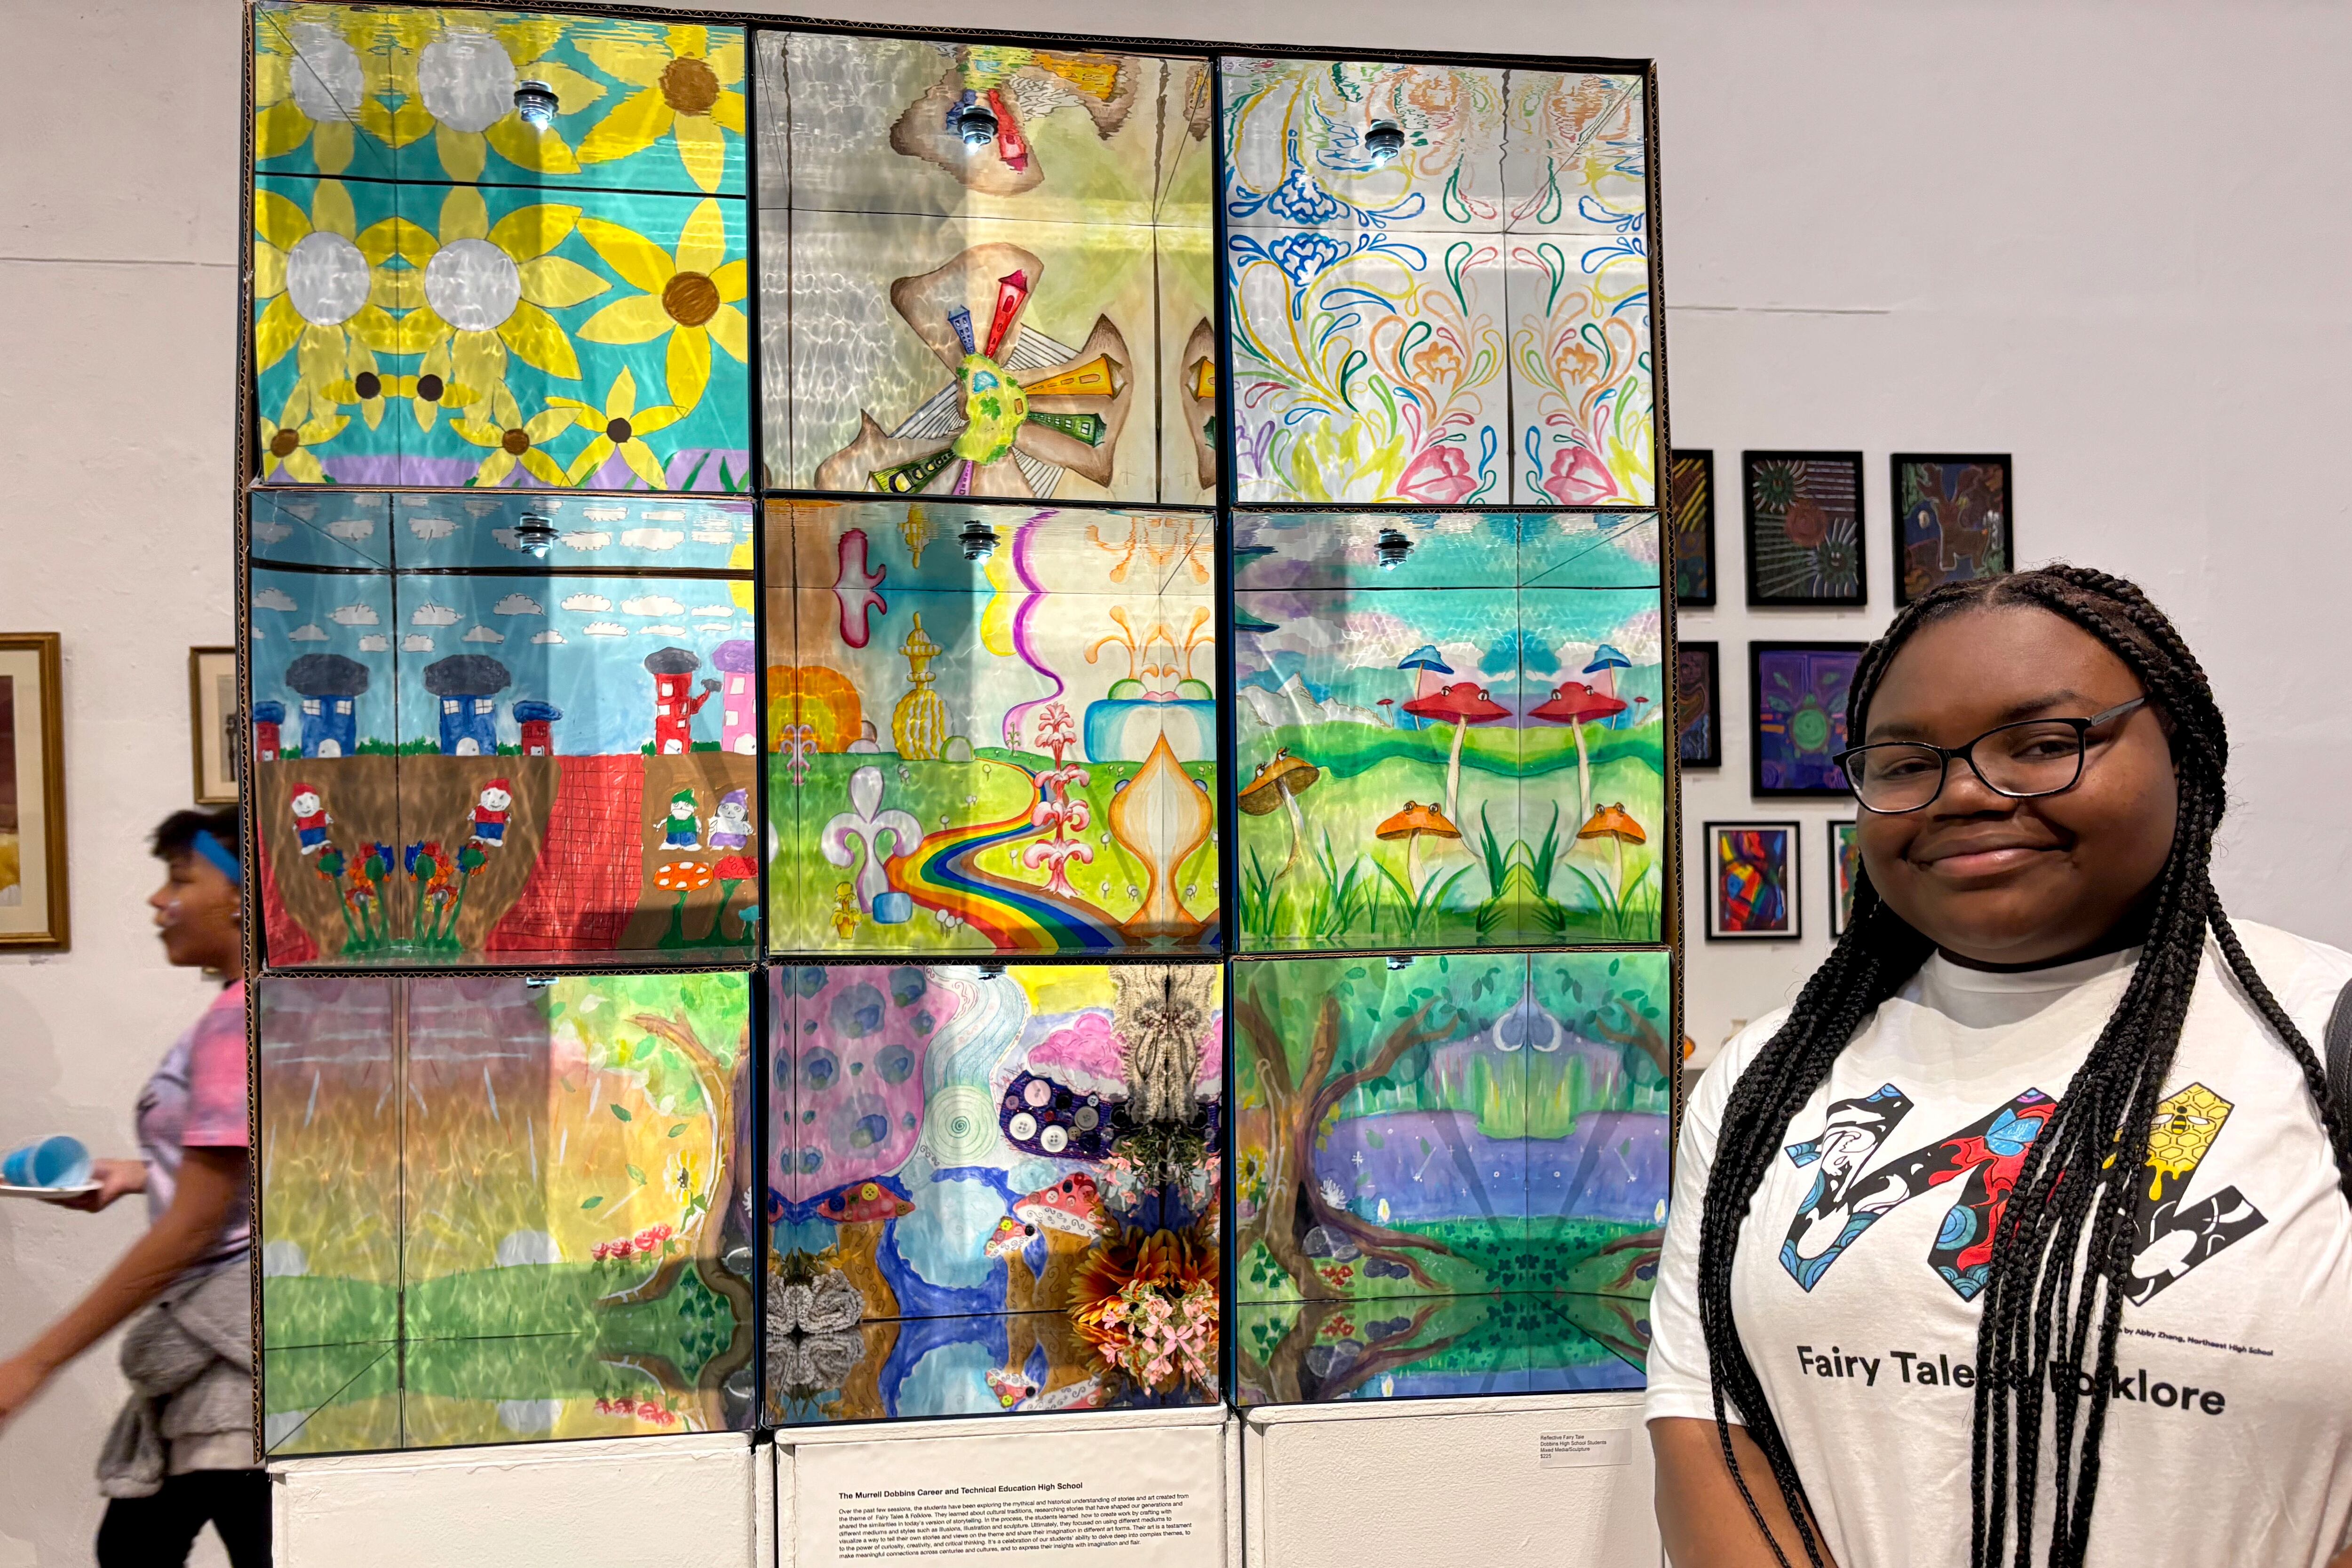 A high school senior with long dark braids and wearing a while t-shirt stands next to a piece of art while posing for a photograph.